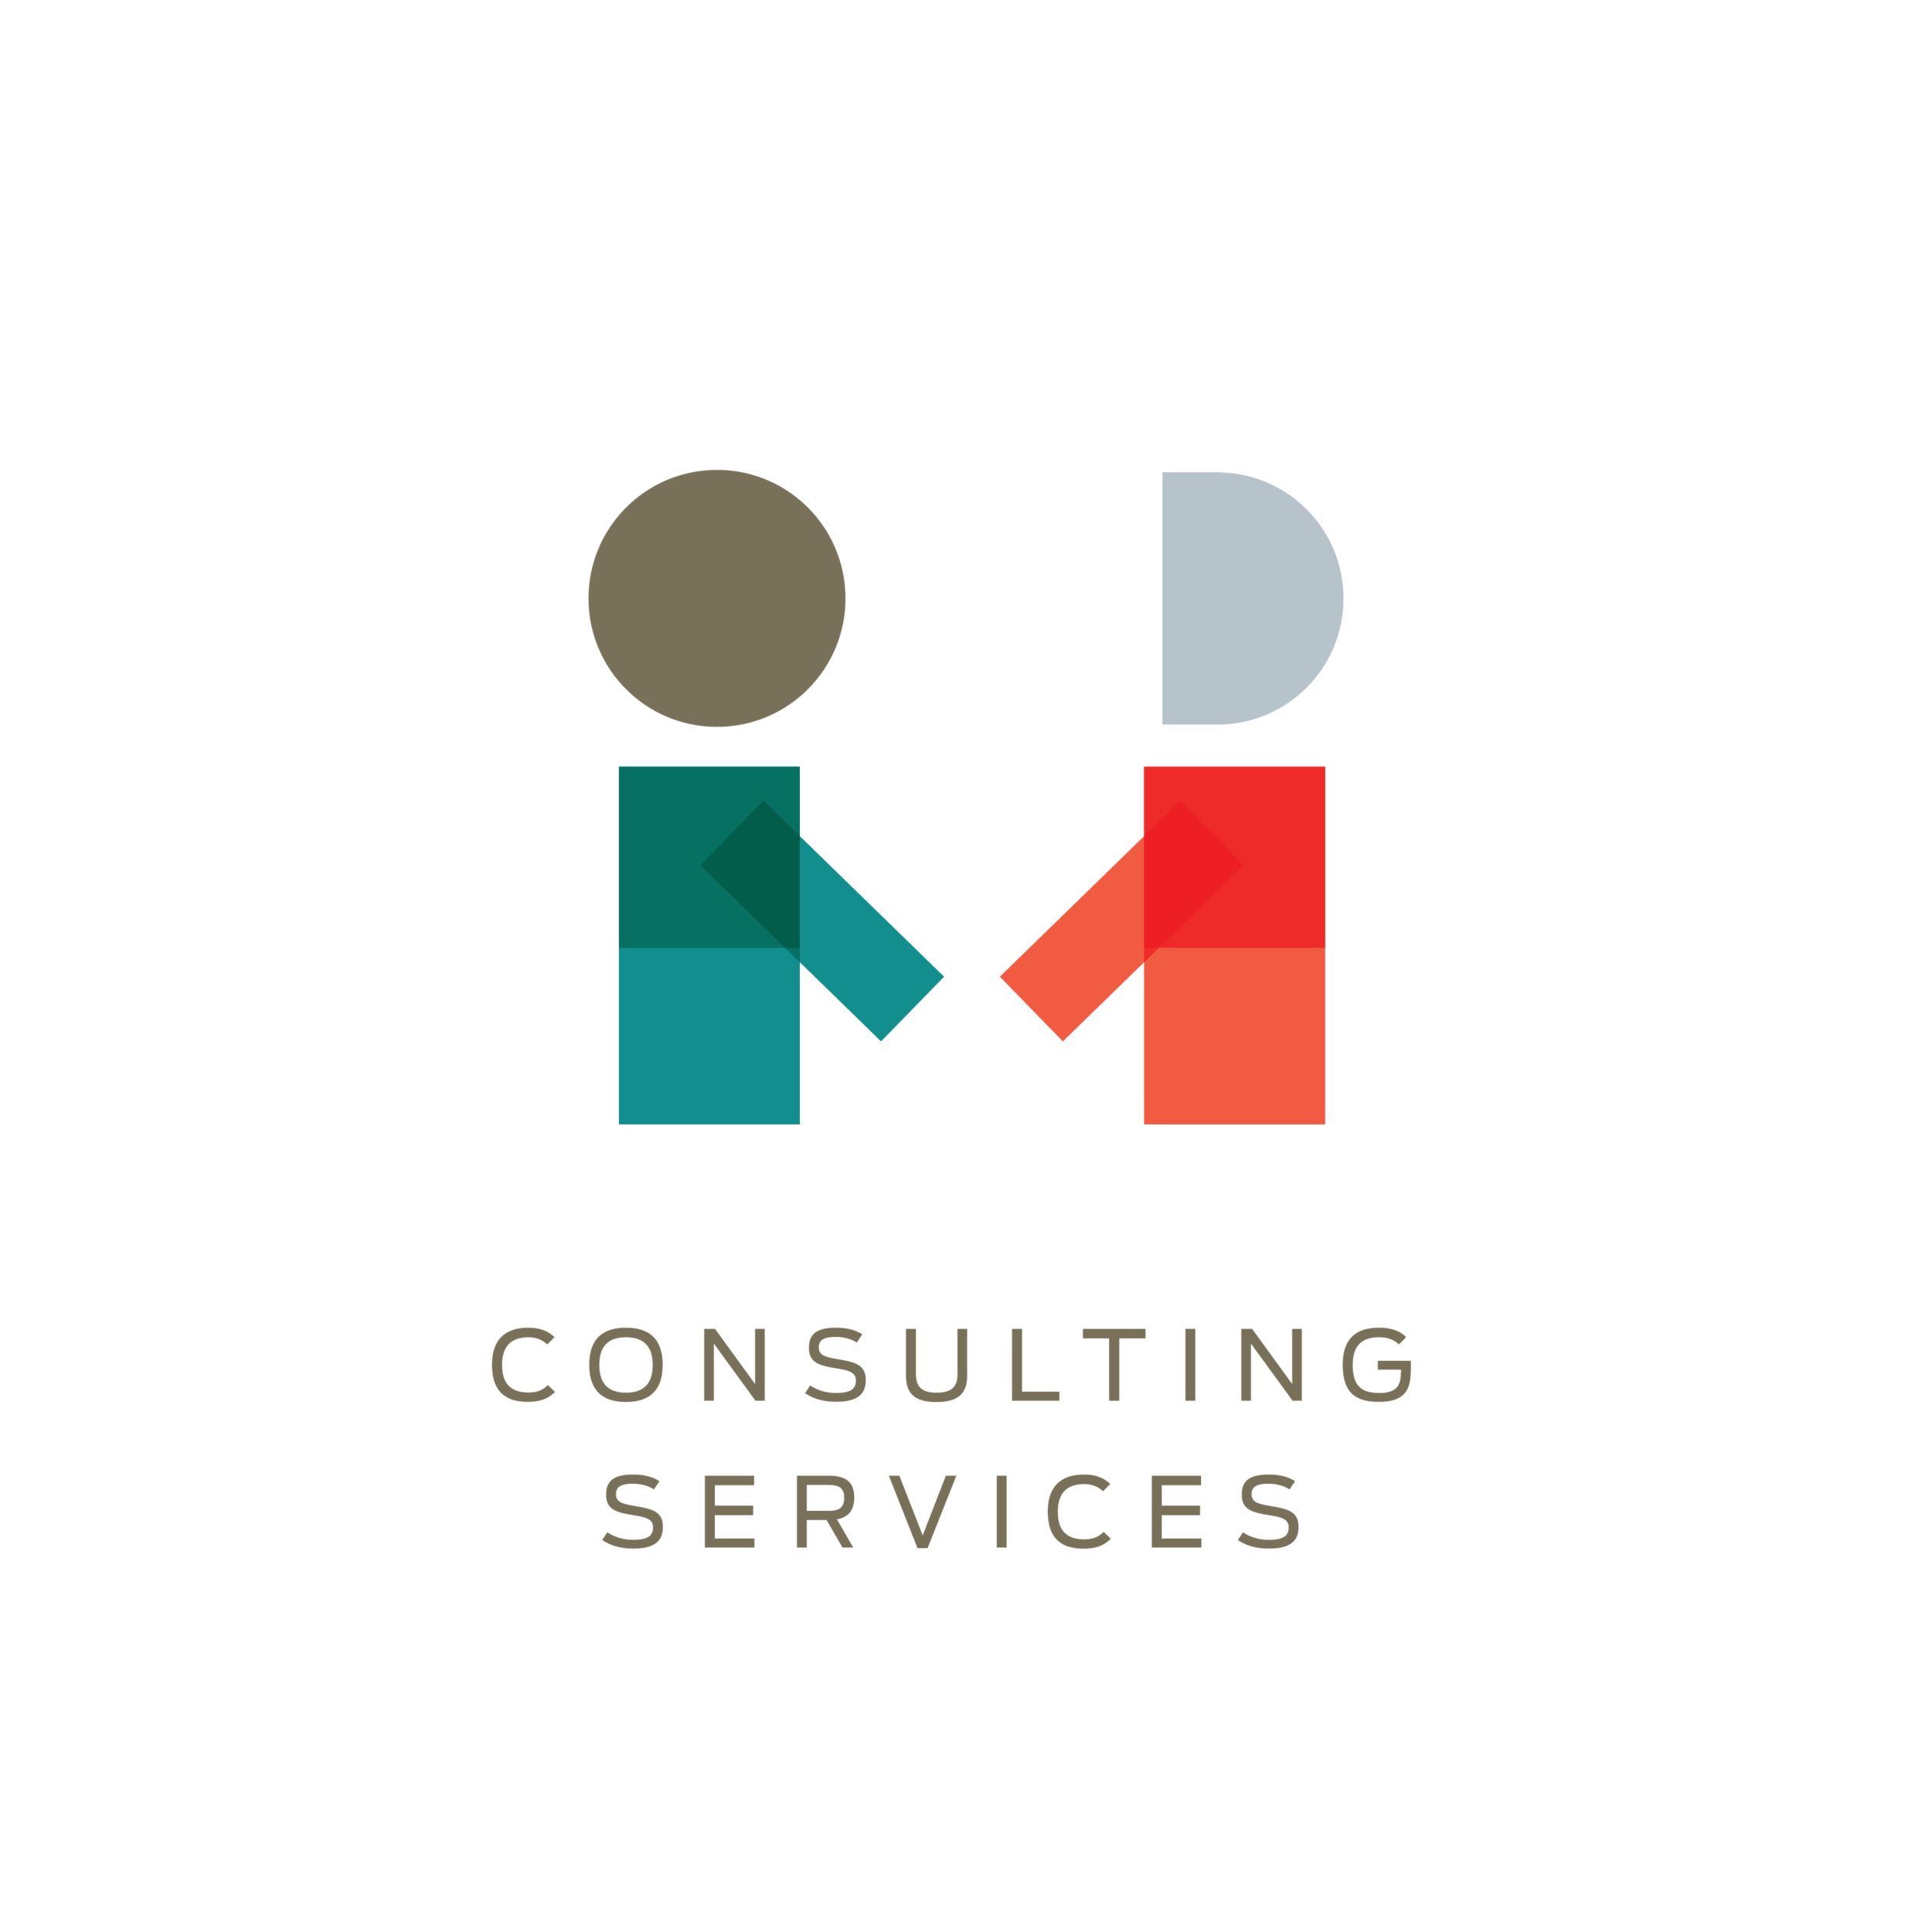 CONSULTING SERVICES-LG.png